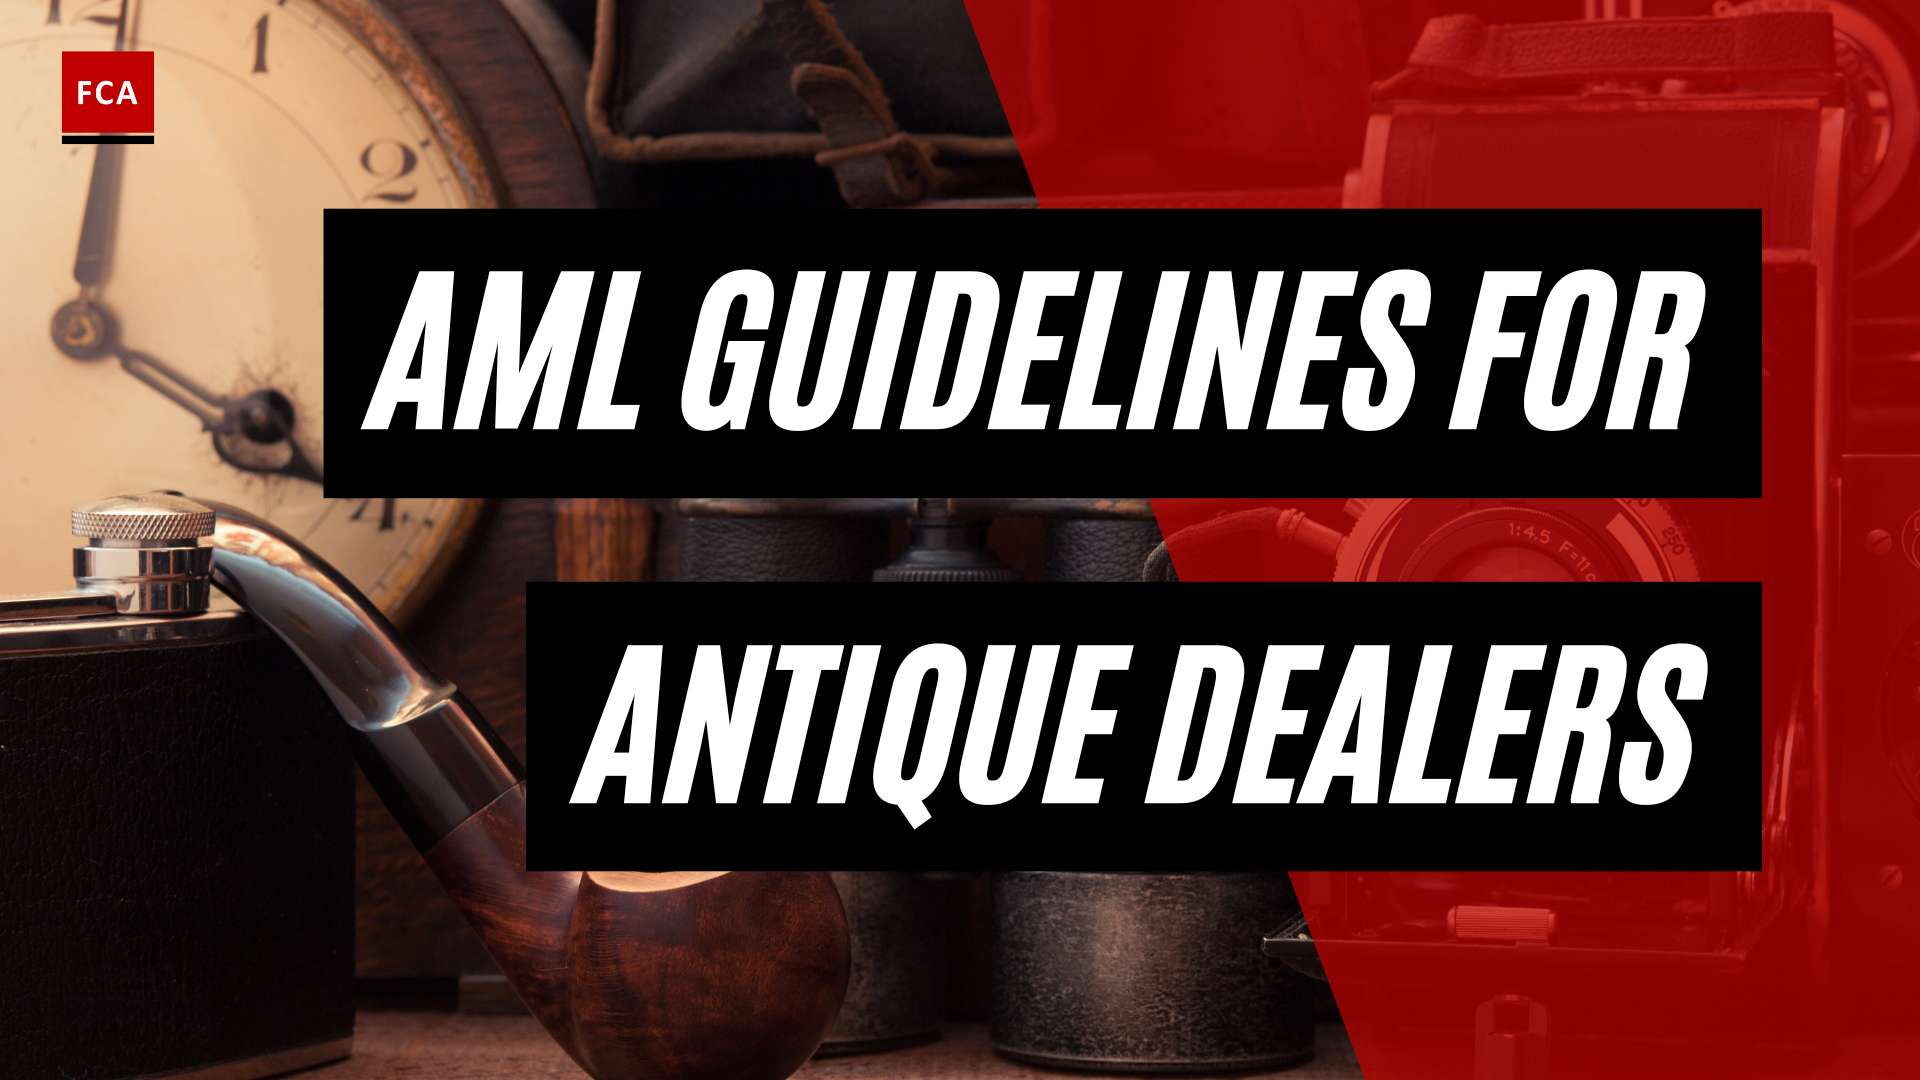 Demystifying Aml Compliance: Essential Guidelines For Antique Dealers